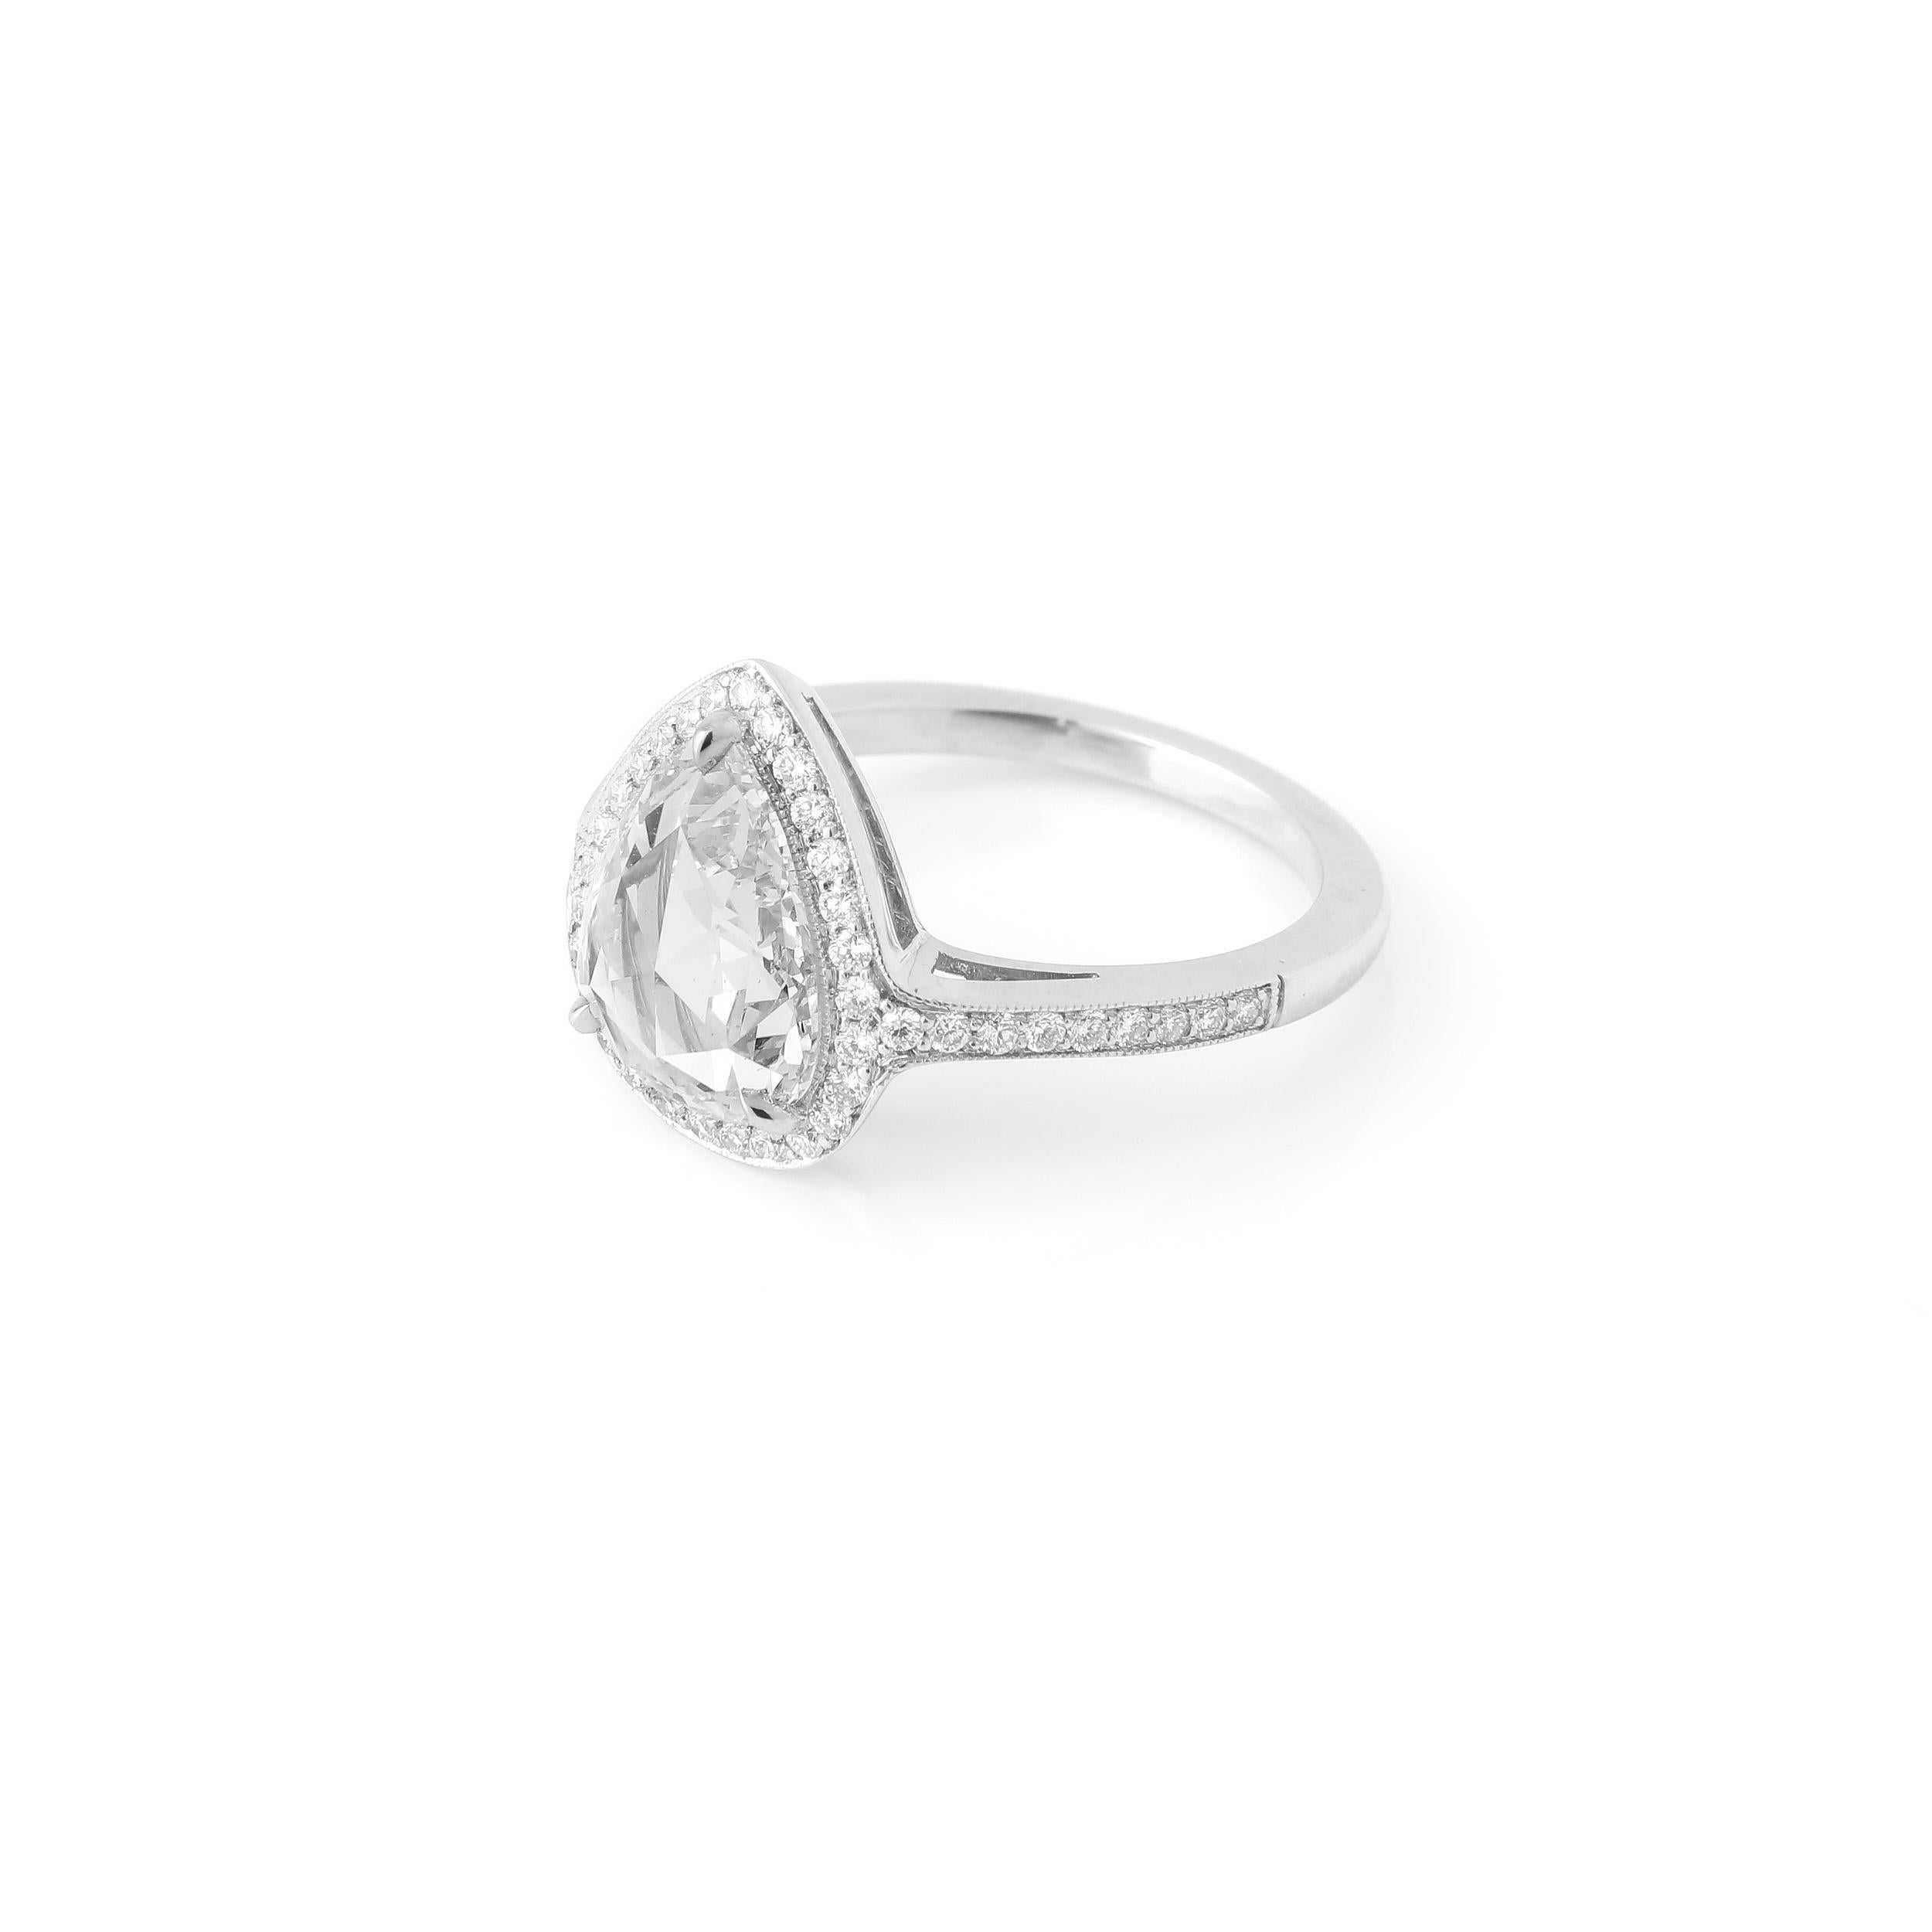 This ring features a 1.66 carat rose cut pear shape diamond, with a high dome characteristic of antique rose cuts. The diamond is not certified, but is approximately G color and VVS clarity. The diamond is set in a sleek platinum mounting,